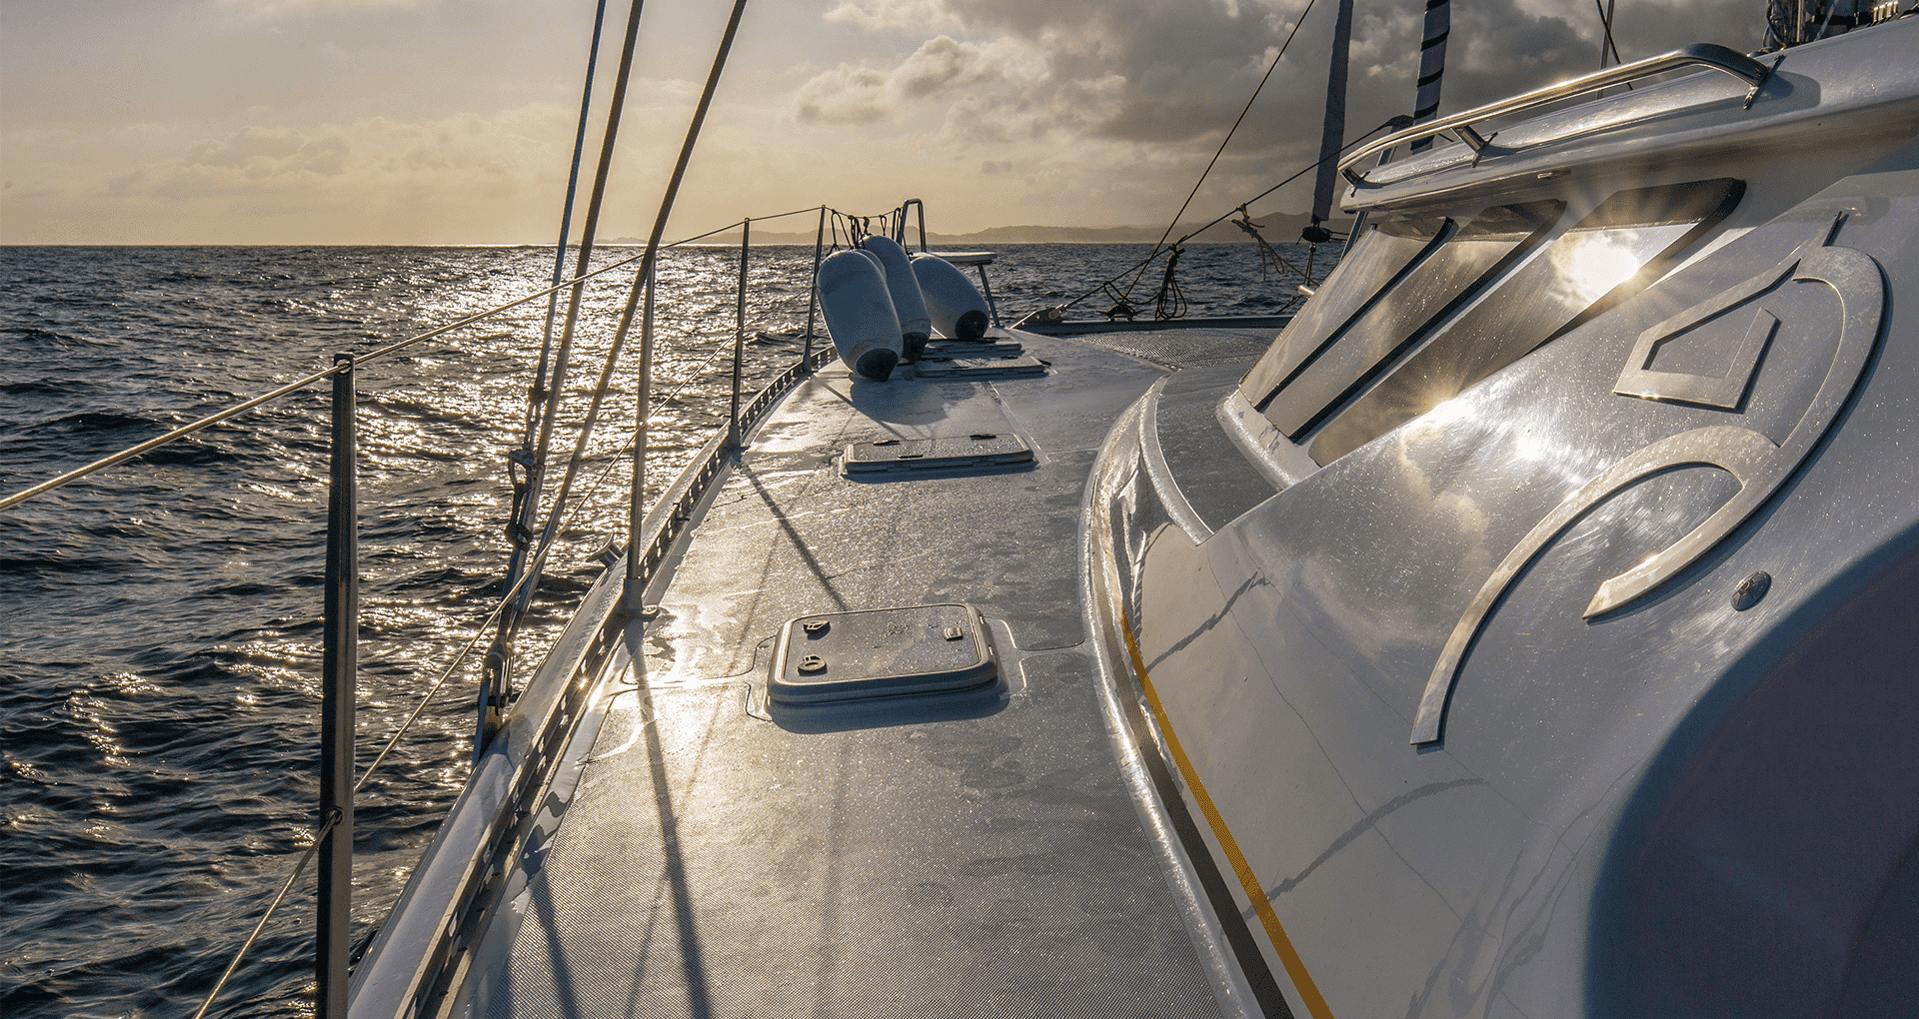 Building a Yacht: Top Things to Know About the Yacht-building Process